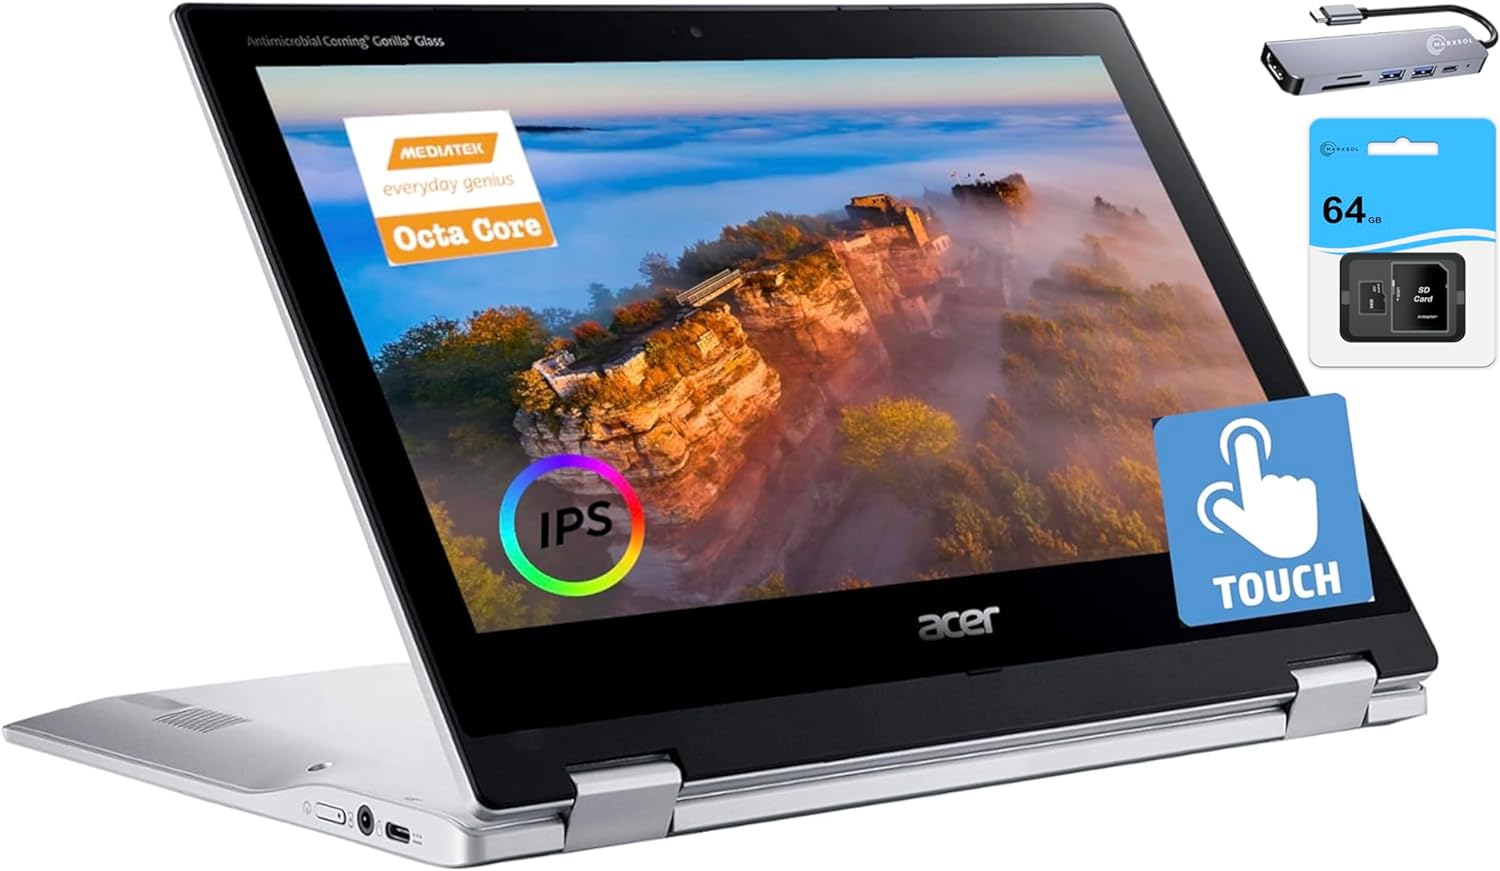 ACER Chromebook Spin 2in1 Convertible Laptop 8Core Proces - Alaska - Anchorage ID1538481